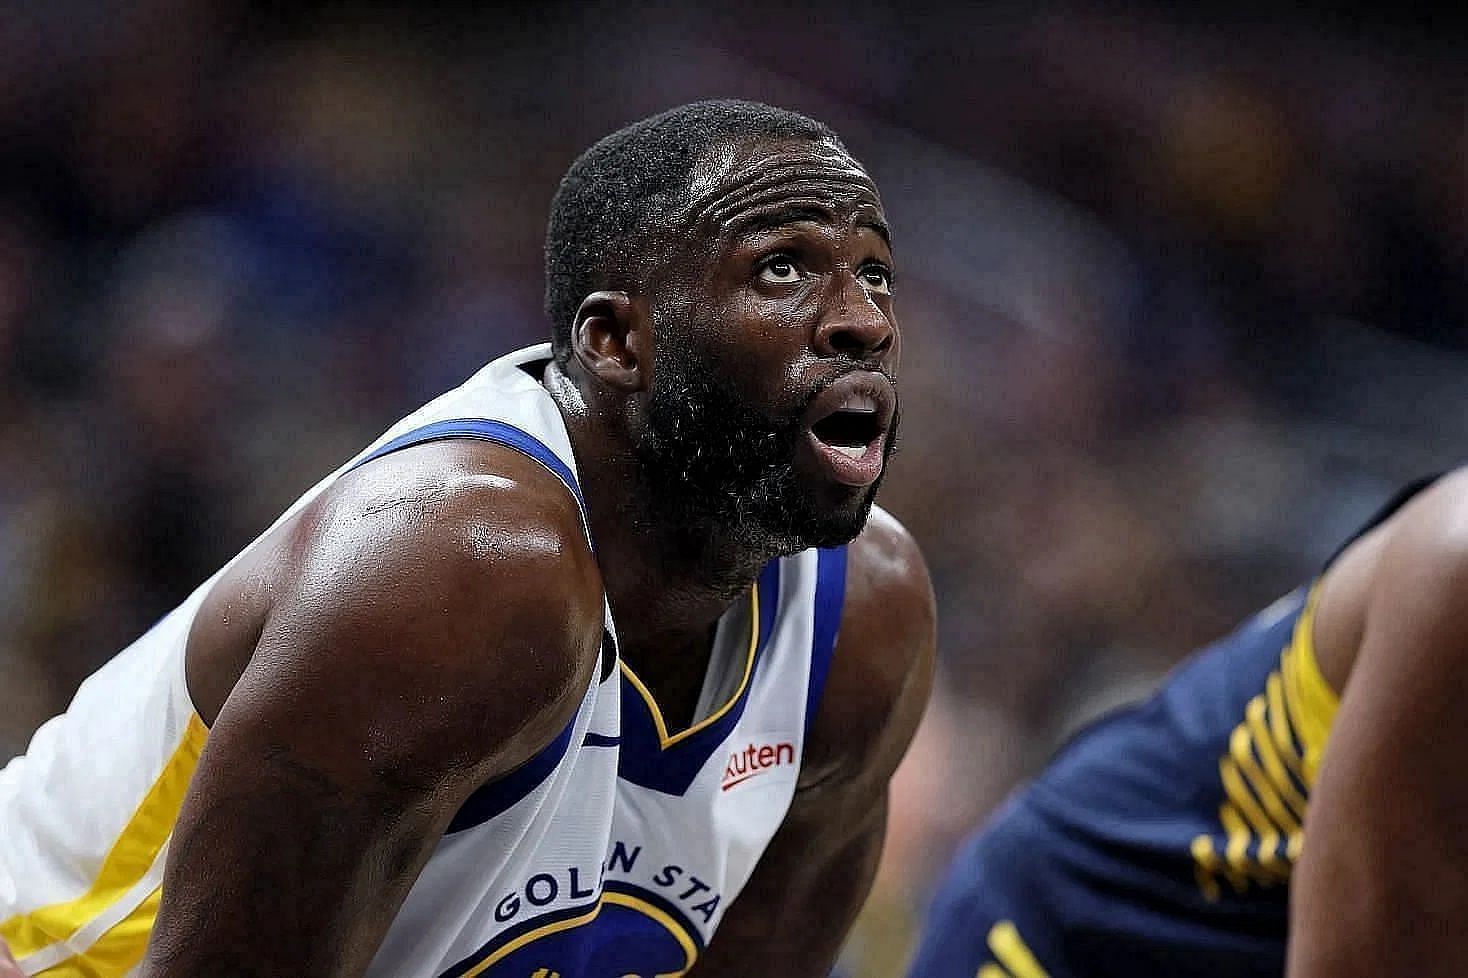 Golden State Warriors All-Star forward Draymond Green plans to make his season debut on Sunday against the Houston Rockets.